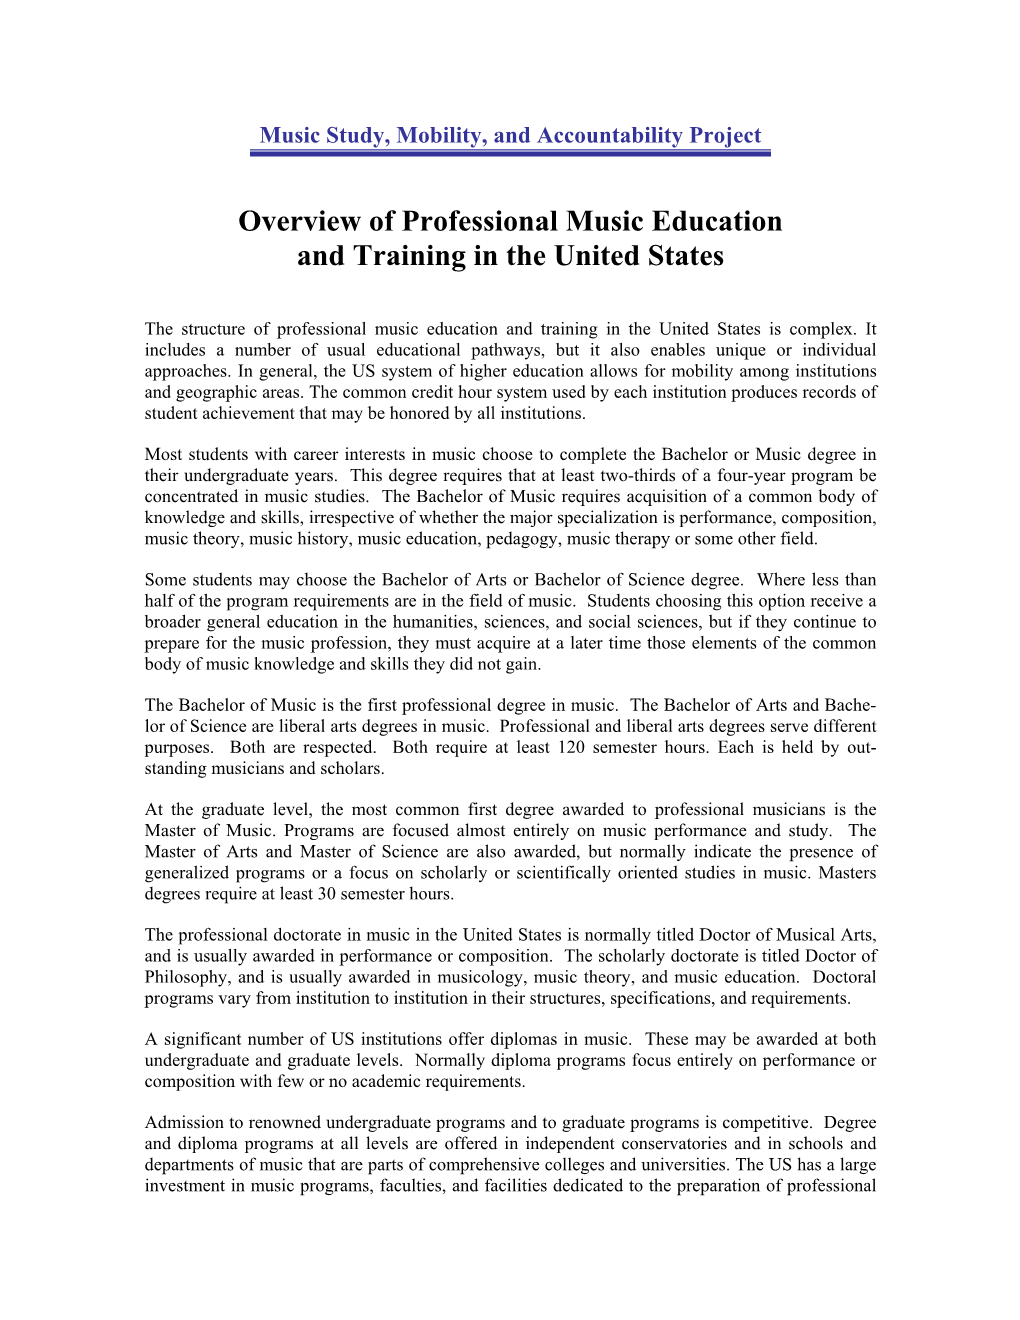 Overview of Professional Music Education and Training in the United States